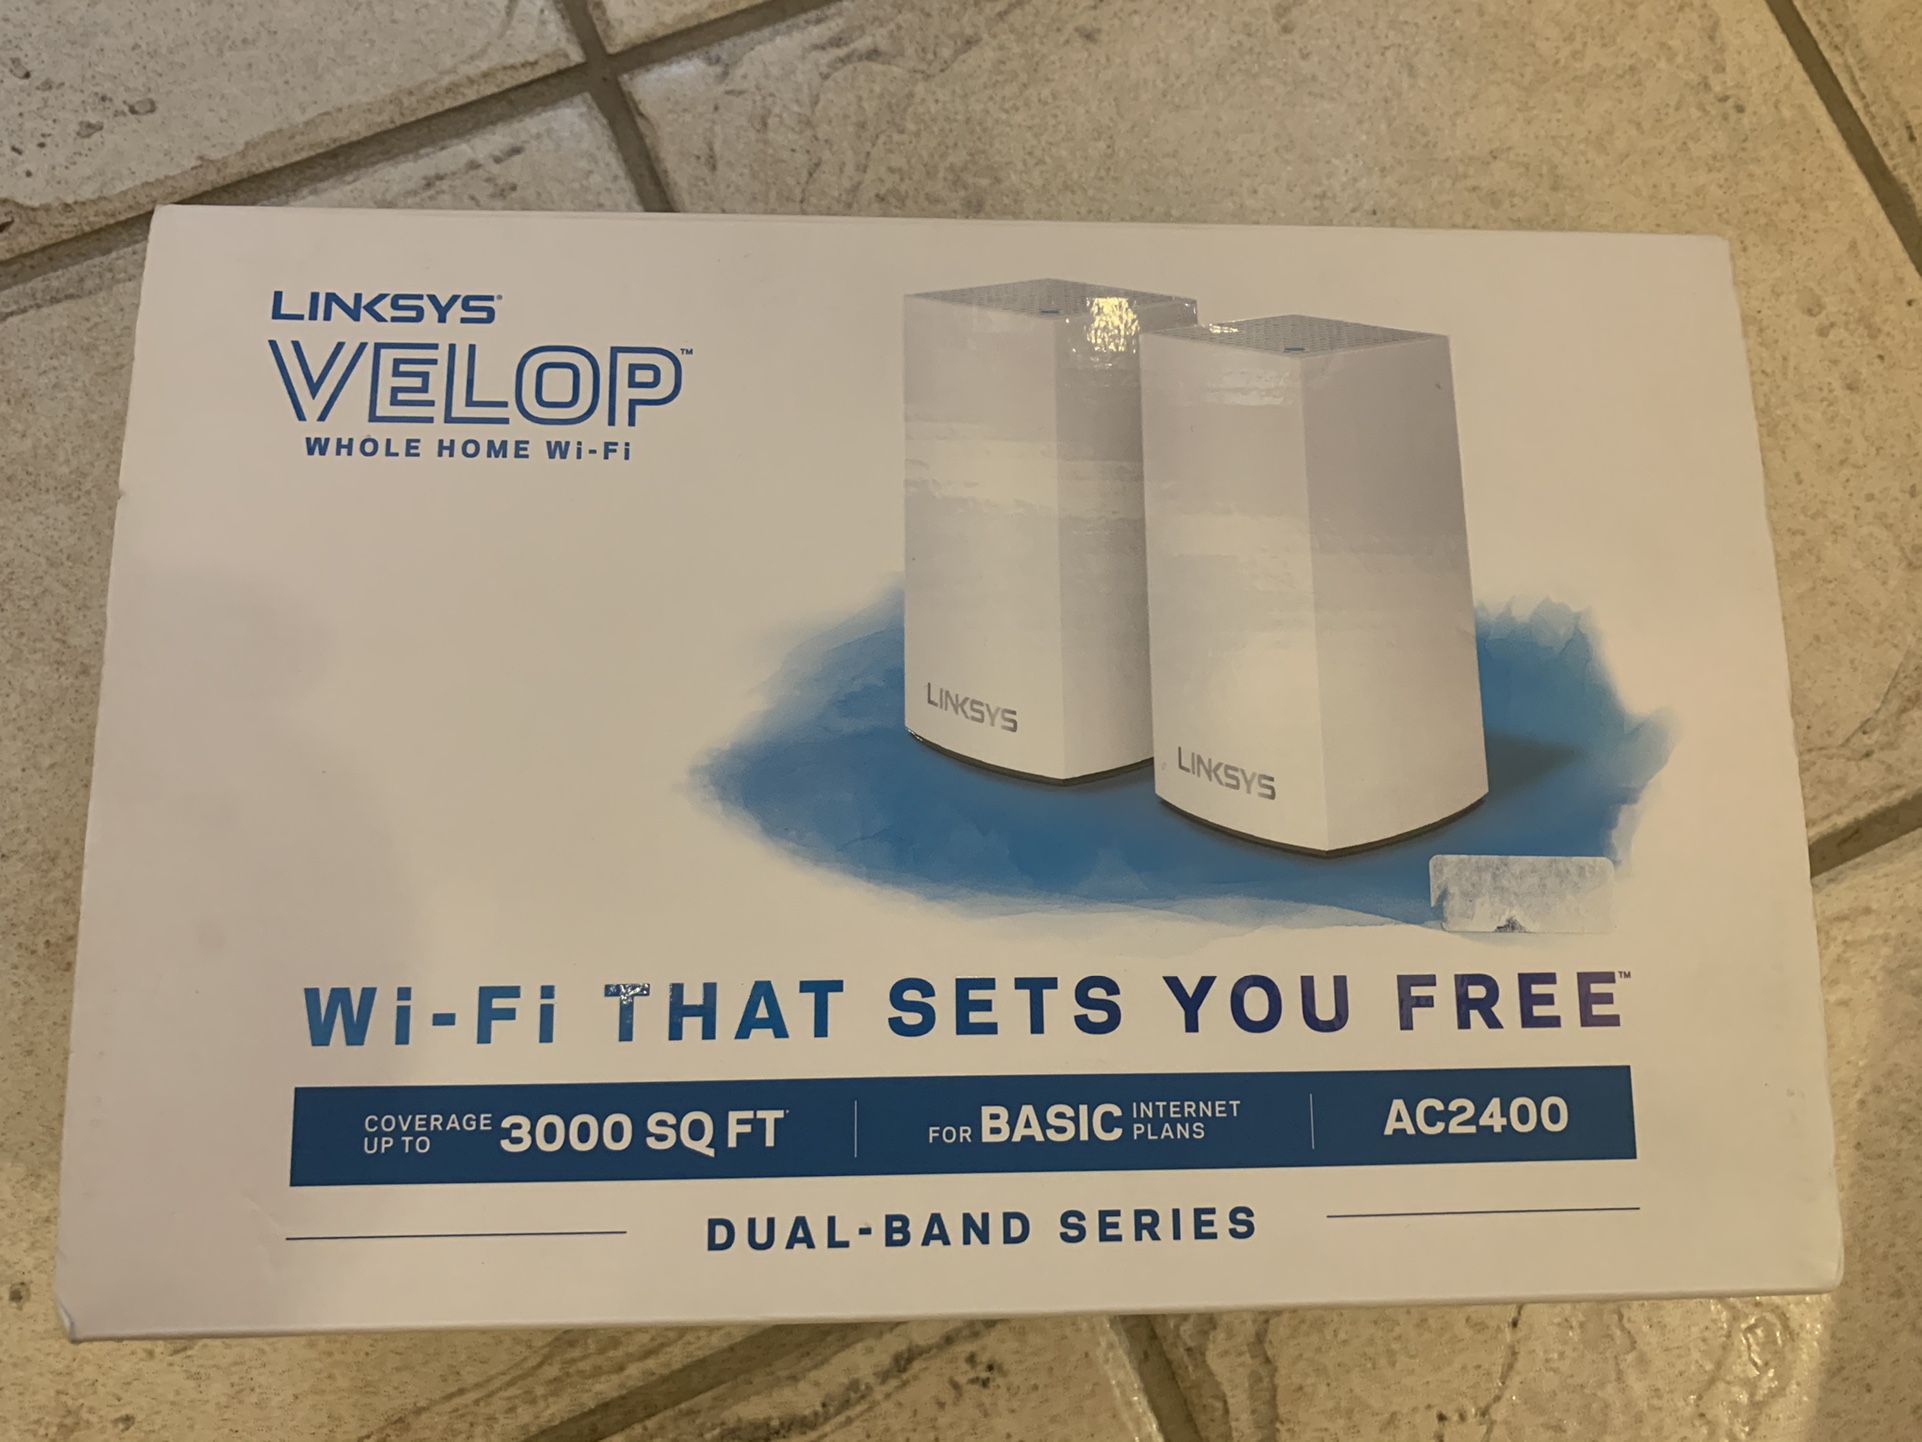 Linksys Velop Whole Home Wi-Fi 2 pack - brand new!